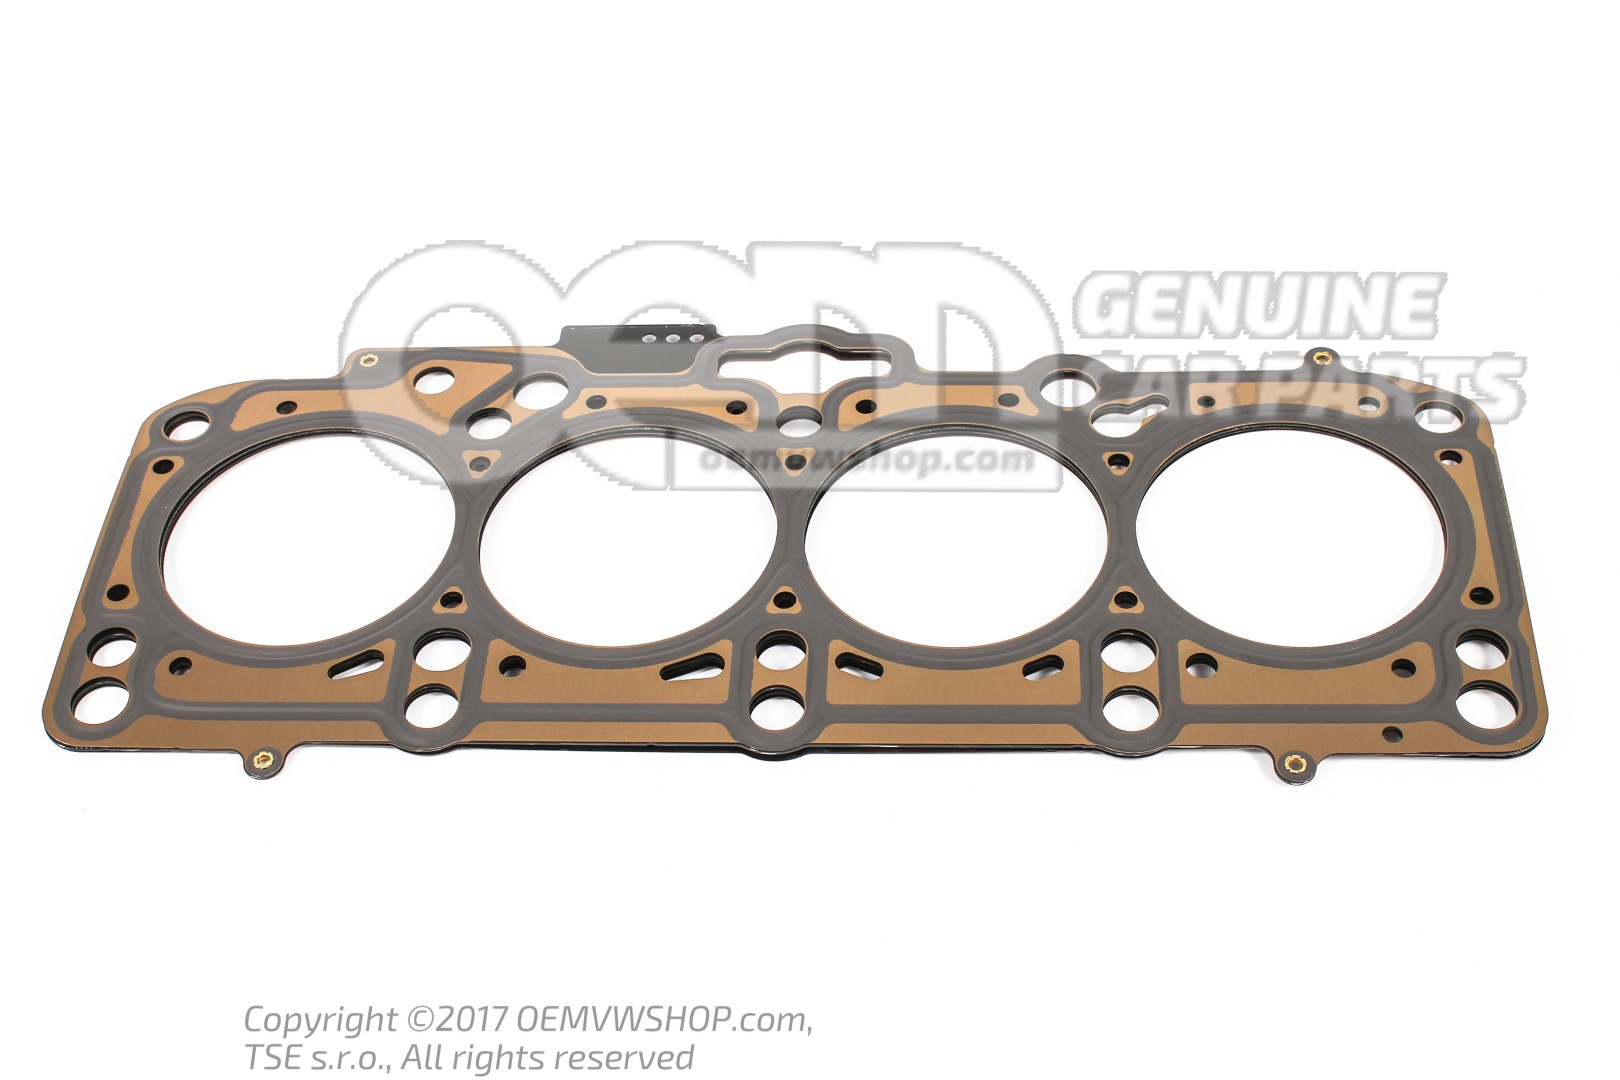 .032 in thickness 930-0088 S&S Cycle Head Gaskets 3 7/16" and 3 1/2" bore